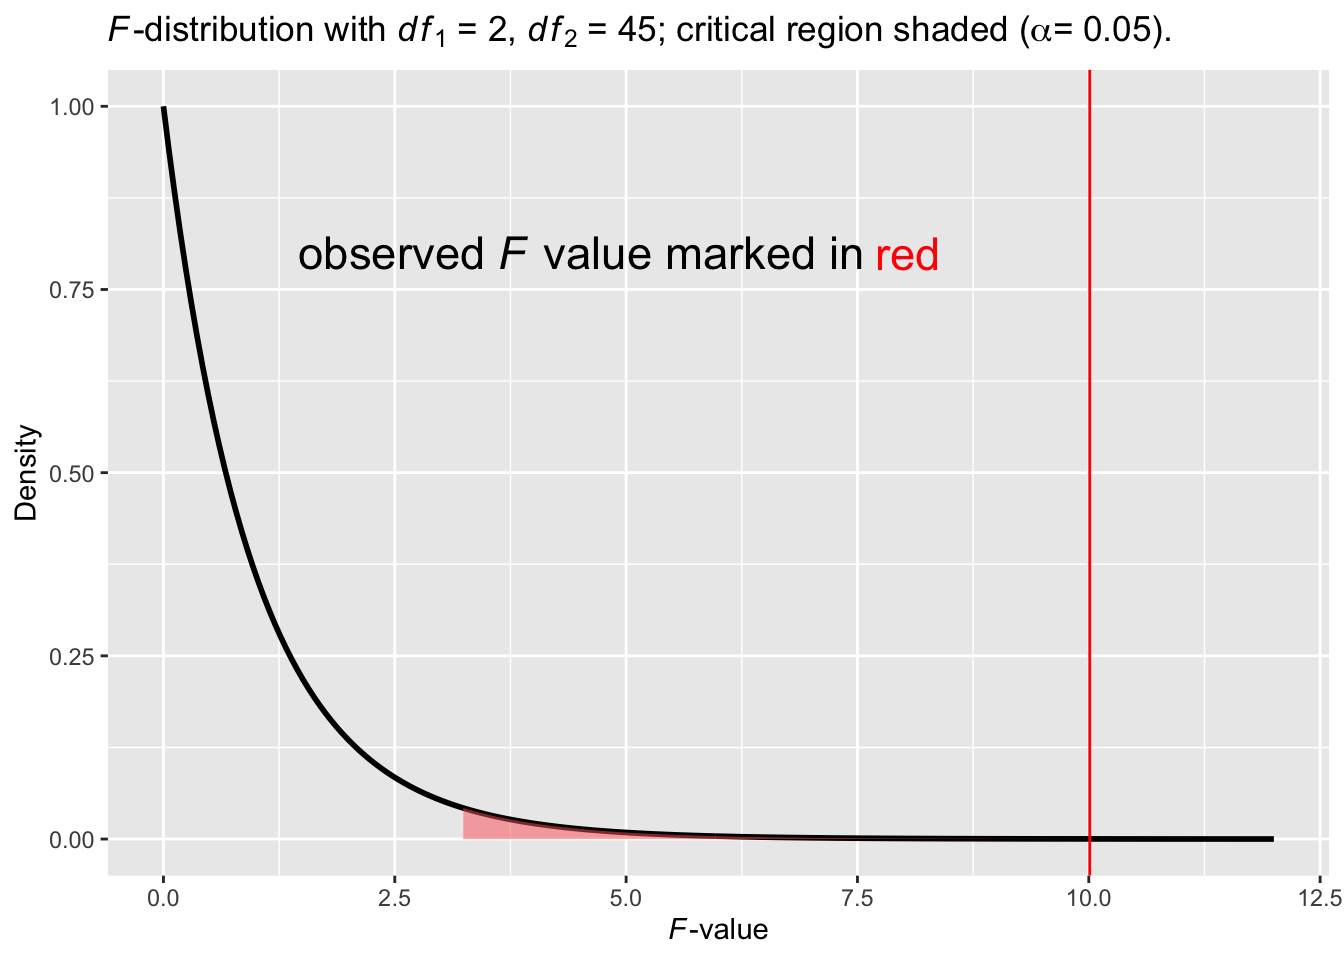 An $F$-distribution with the observed $p$-value